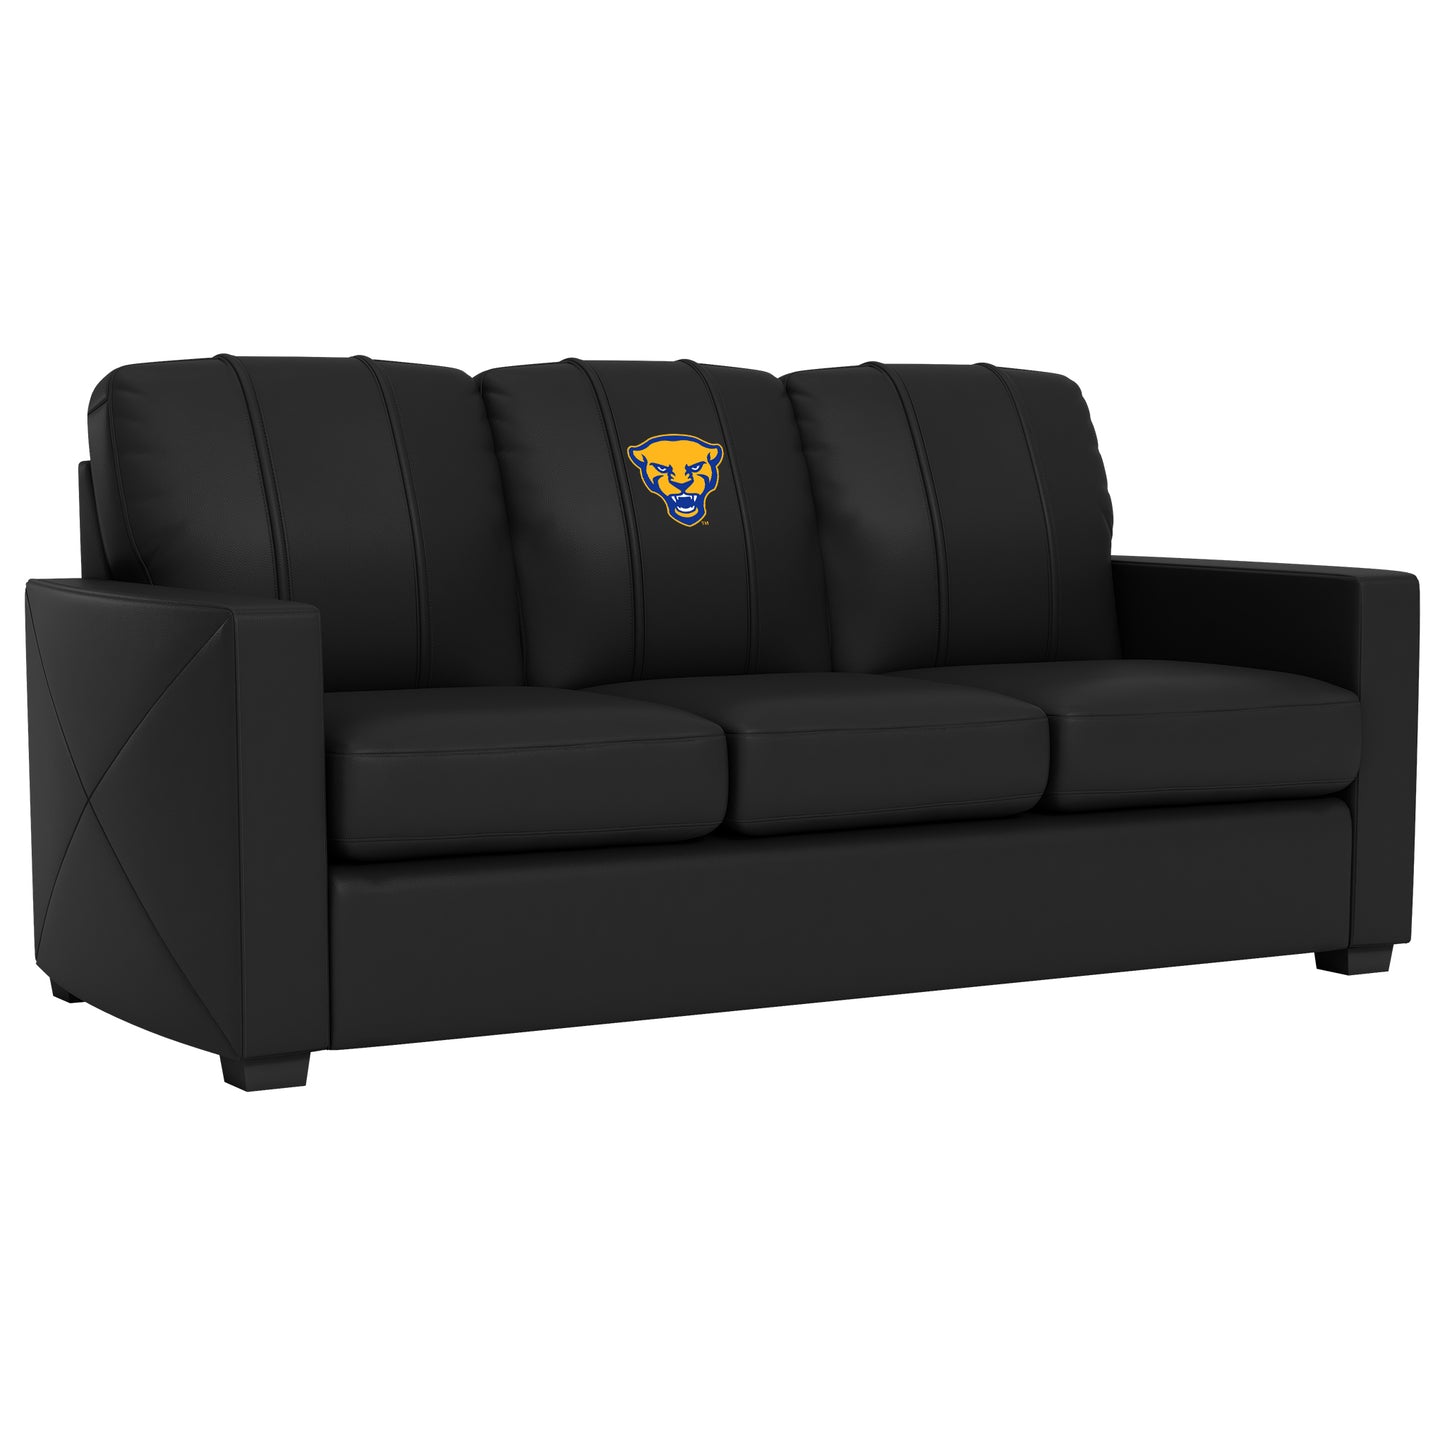 Silver Sofa with Pittsburgh Panthers Alternate Logo